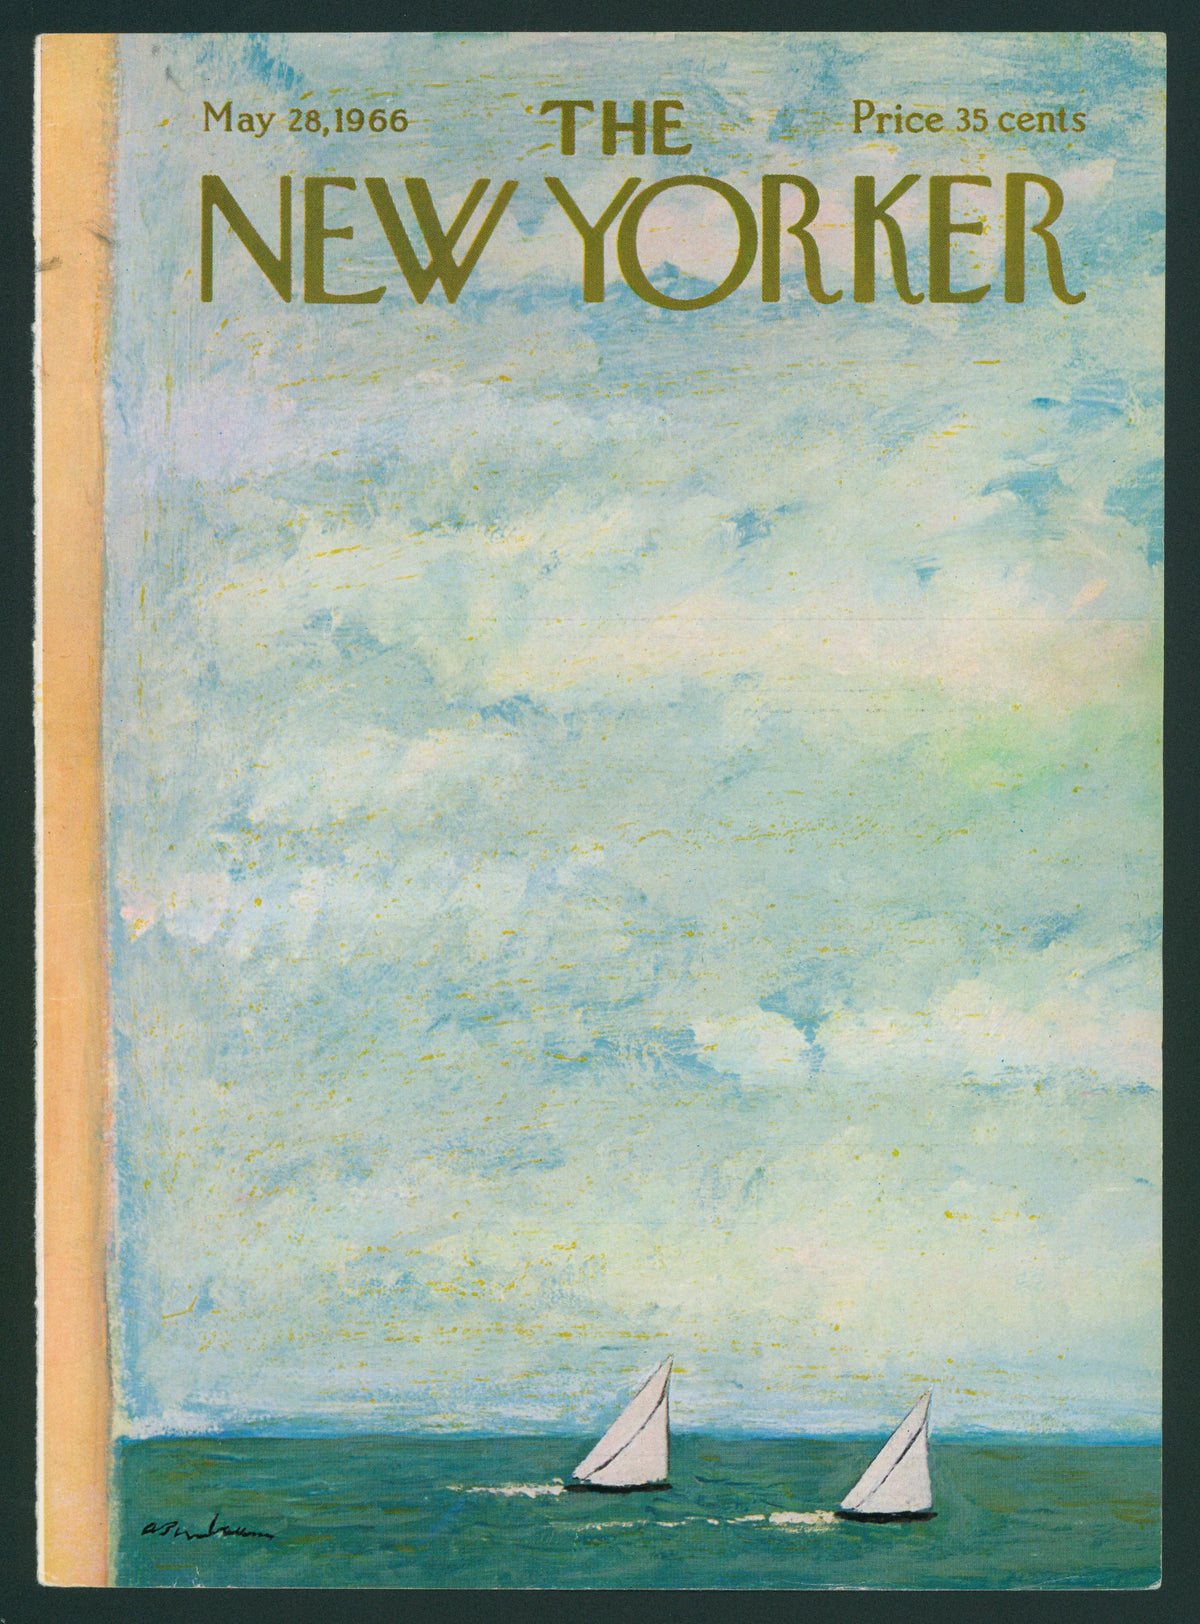 Serene Sailboats- The New Yorker - Authentic Vintage Antique Print